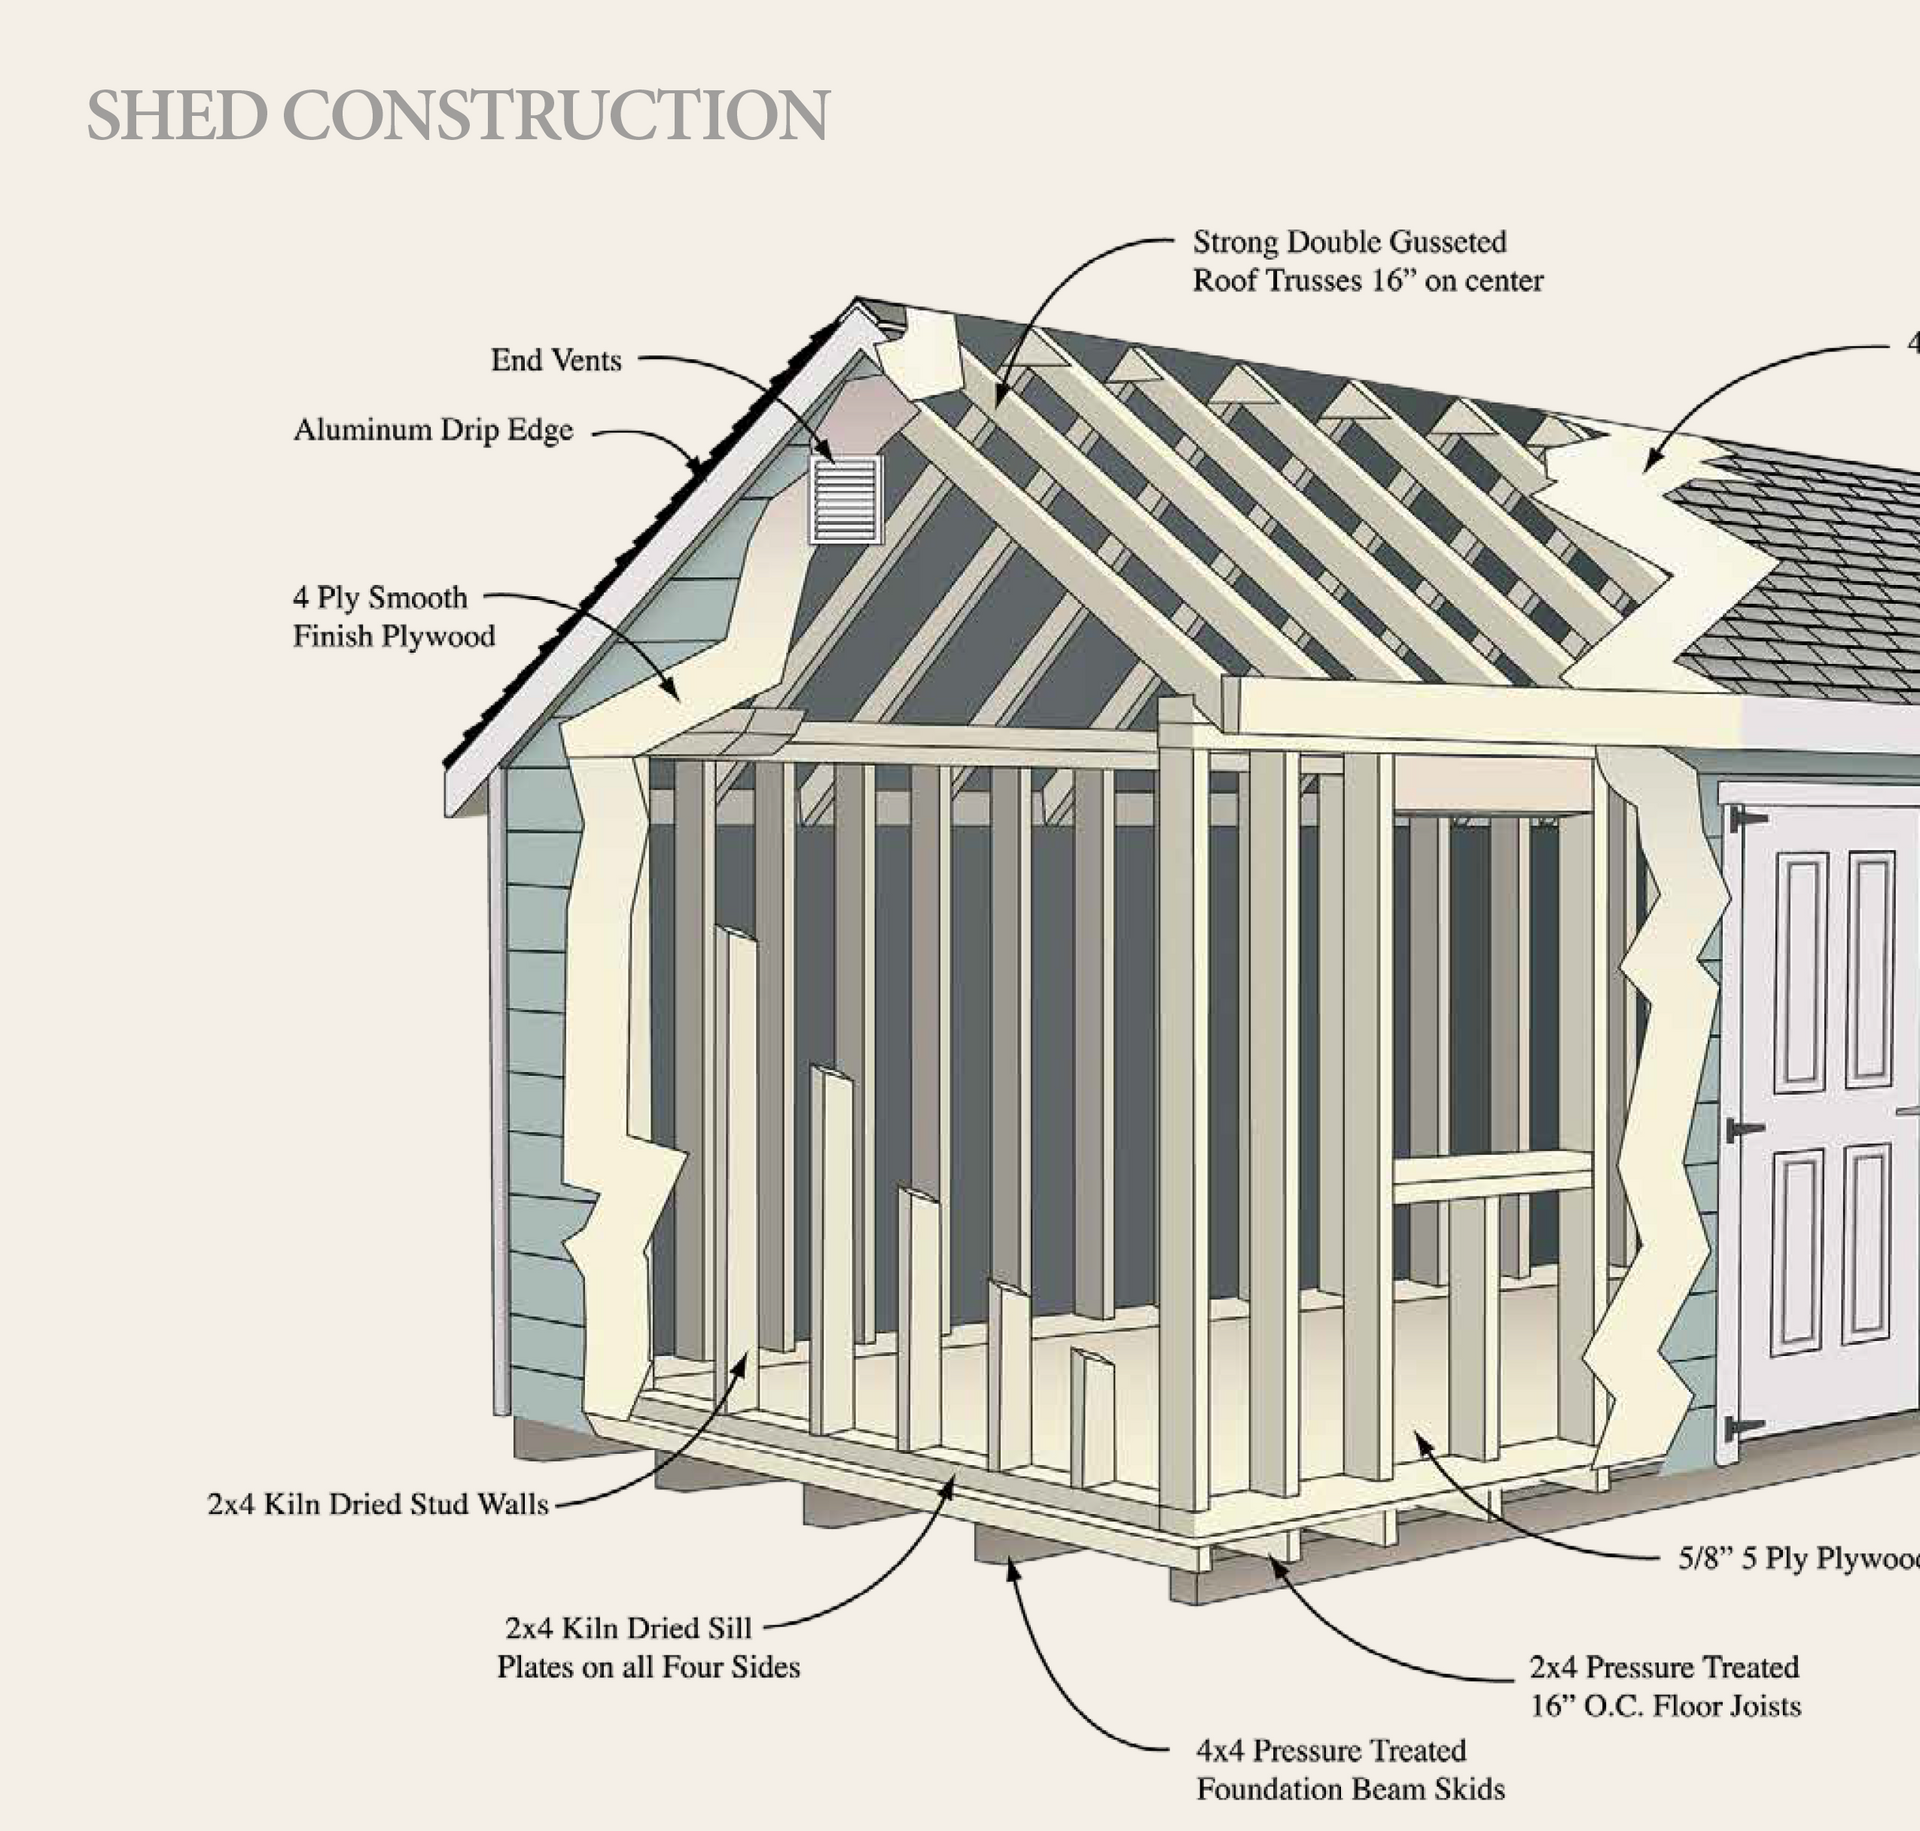 a diagram of a shed construction showing the roof and walls